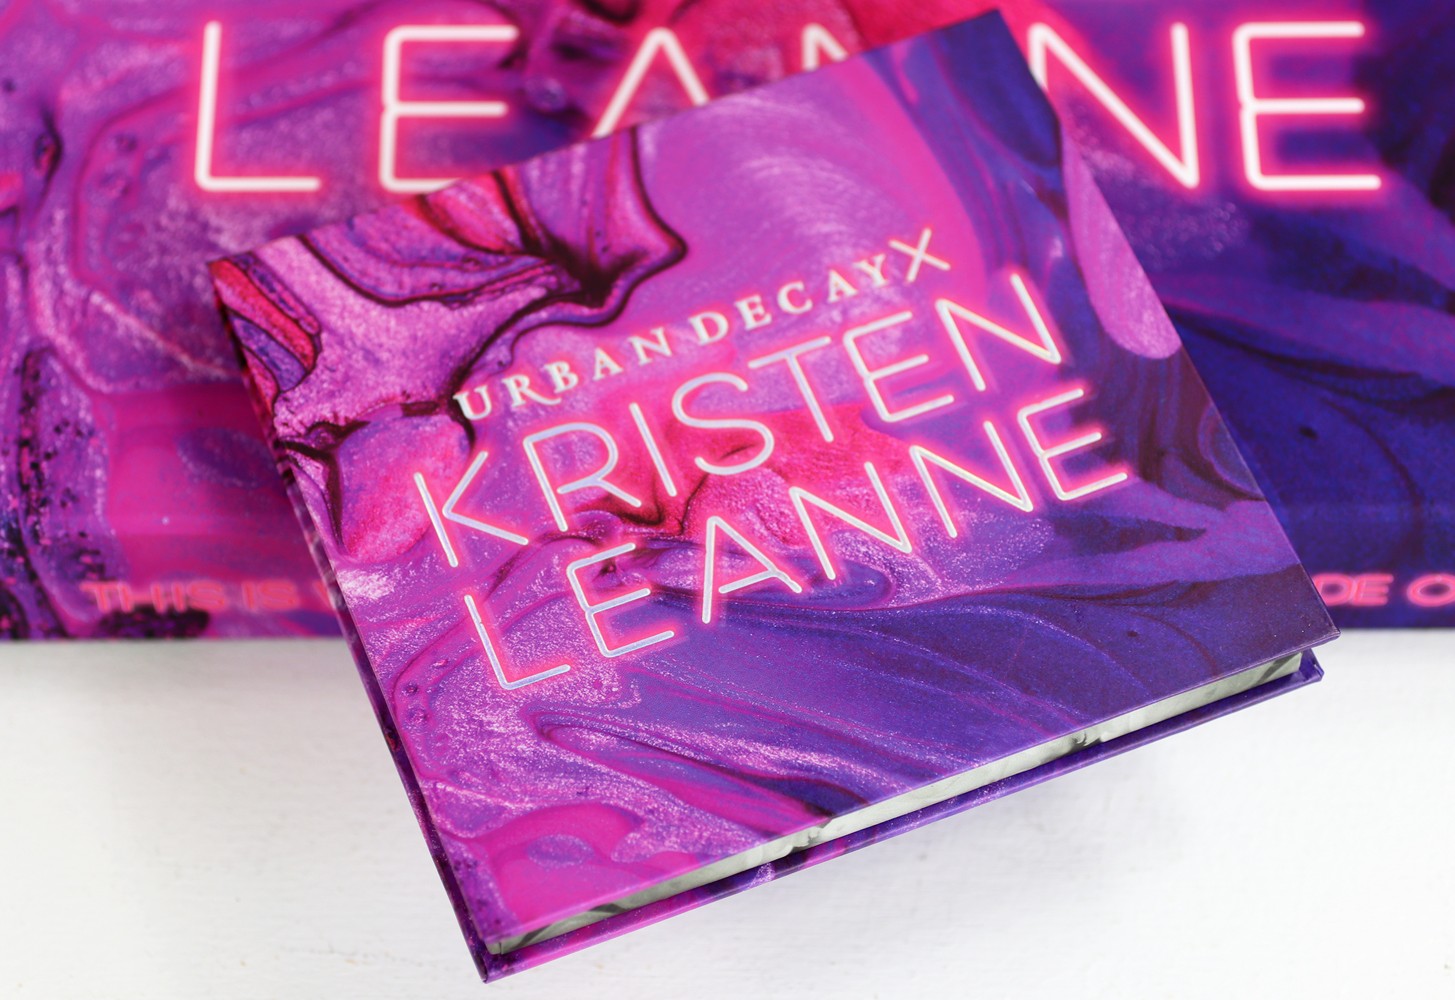 Urban Decay x Kristen Leanne Kaleidoscope Dream Palette Review and Swatches by popular Los Angeles beauty blogger My Beauty Bunny